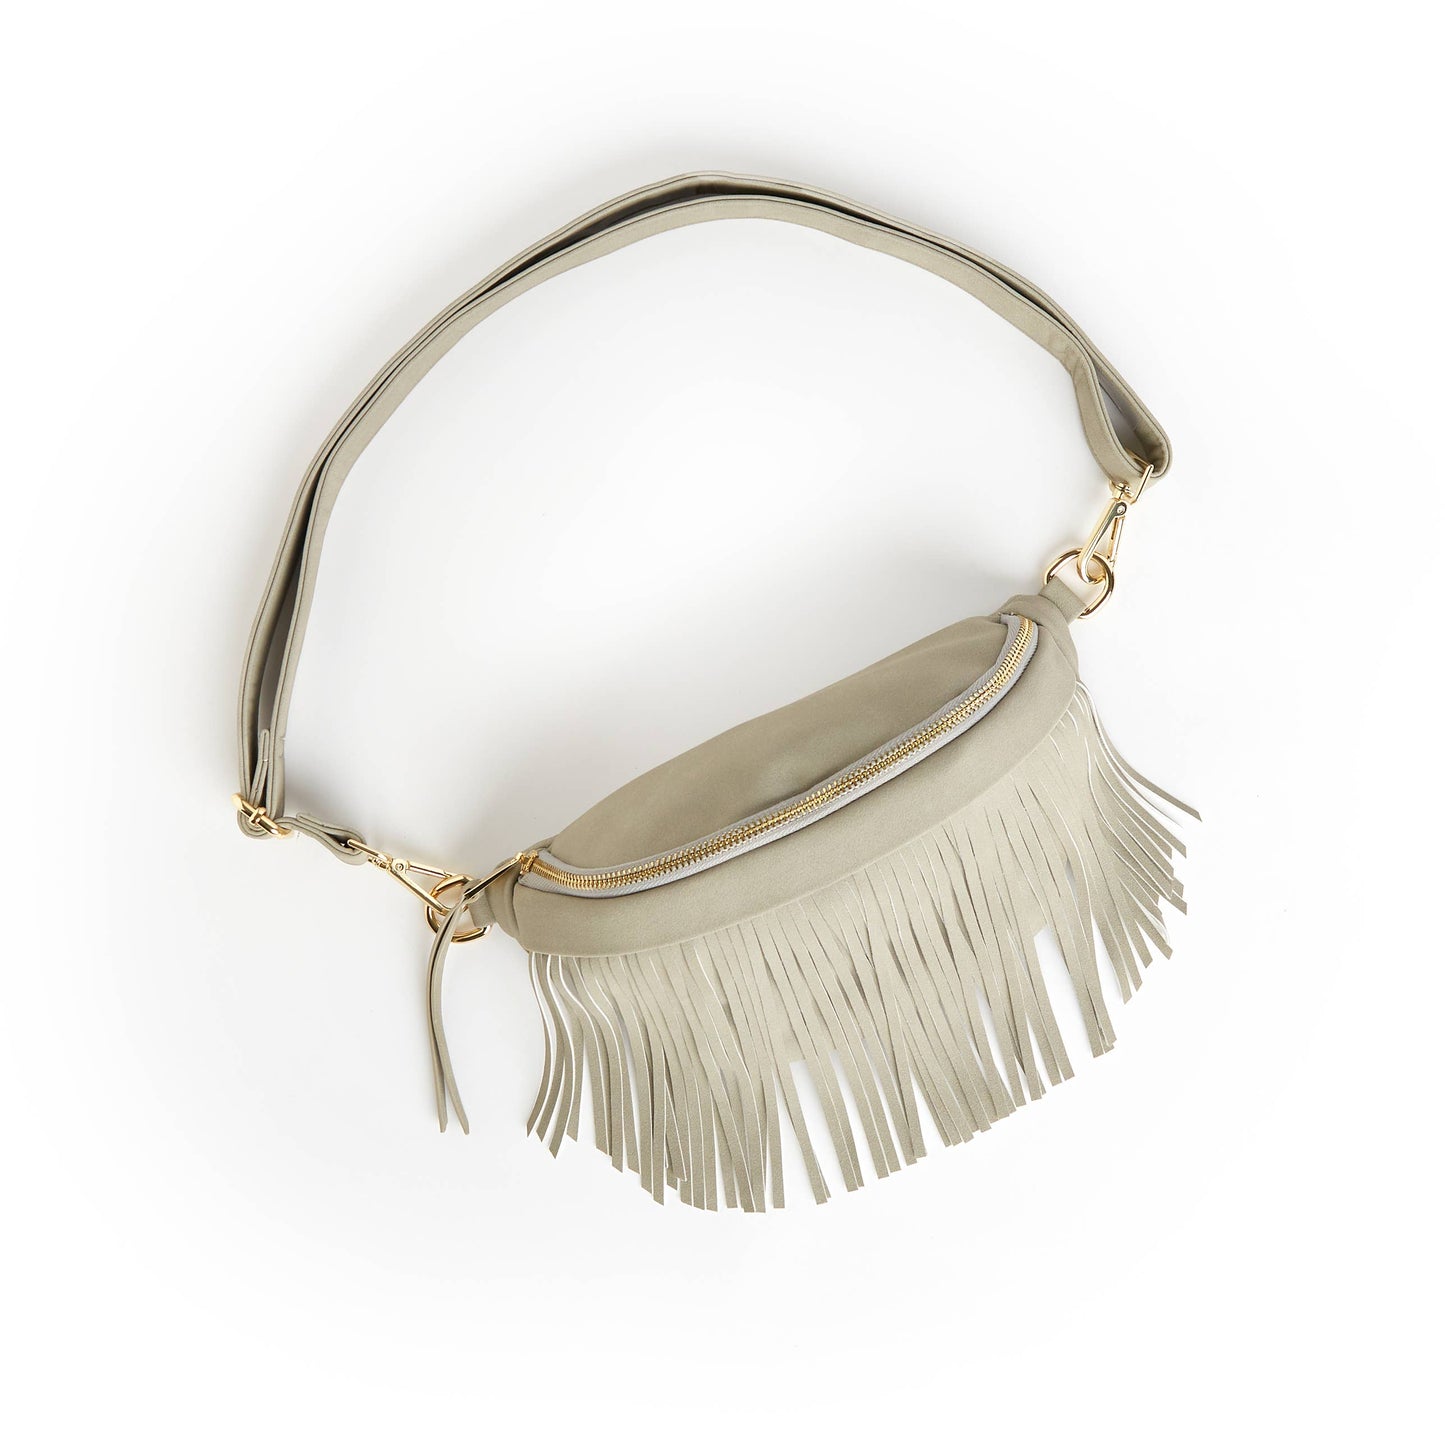 Grey Suede Bum Bag with REMOVABLE Fringe